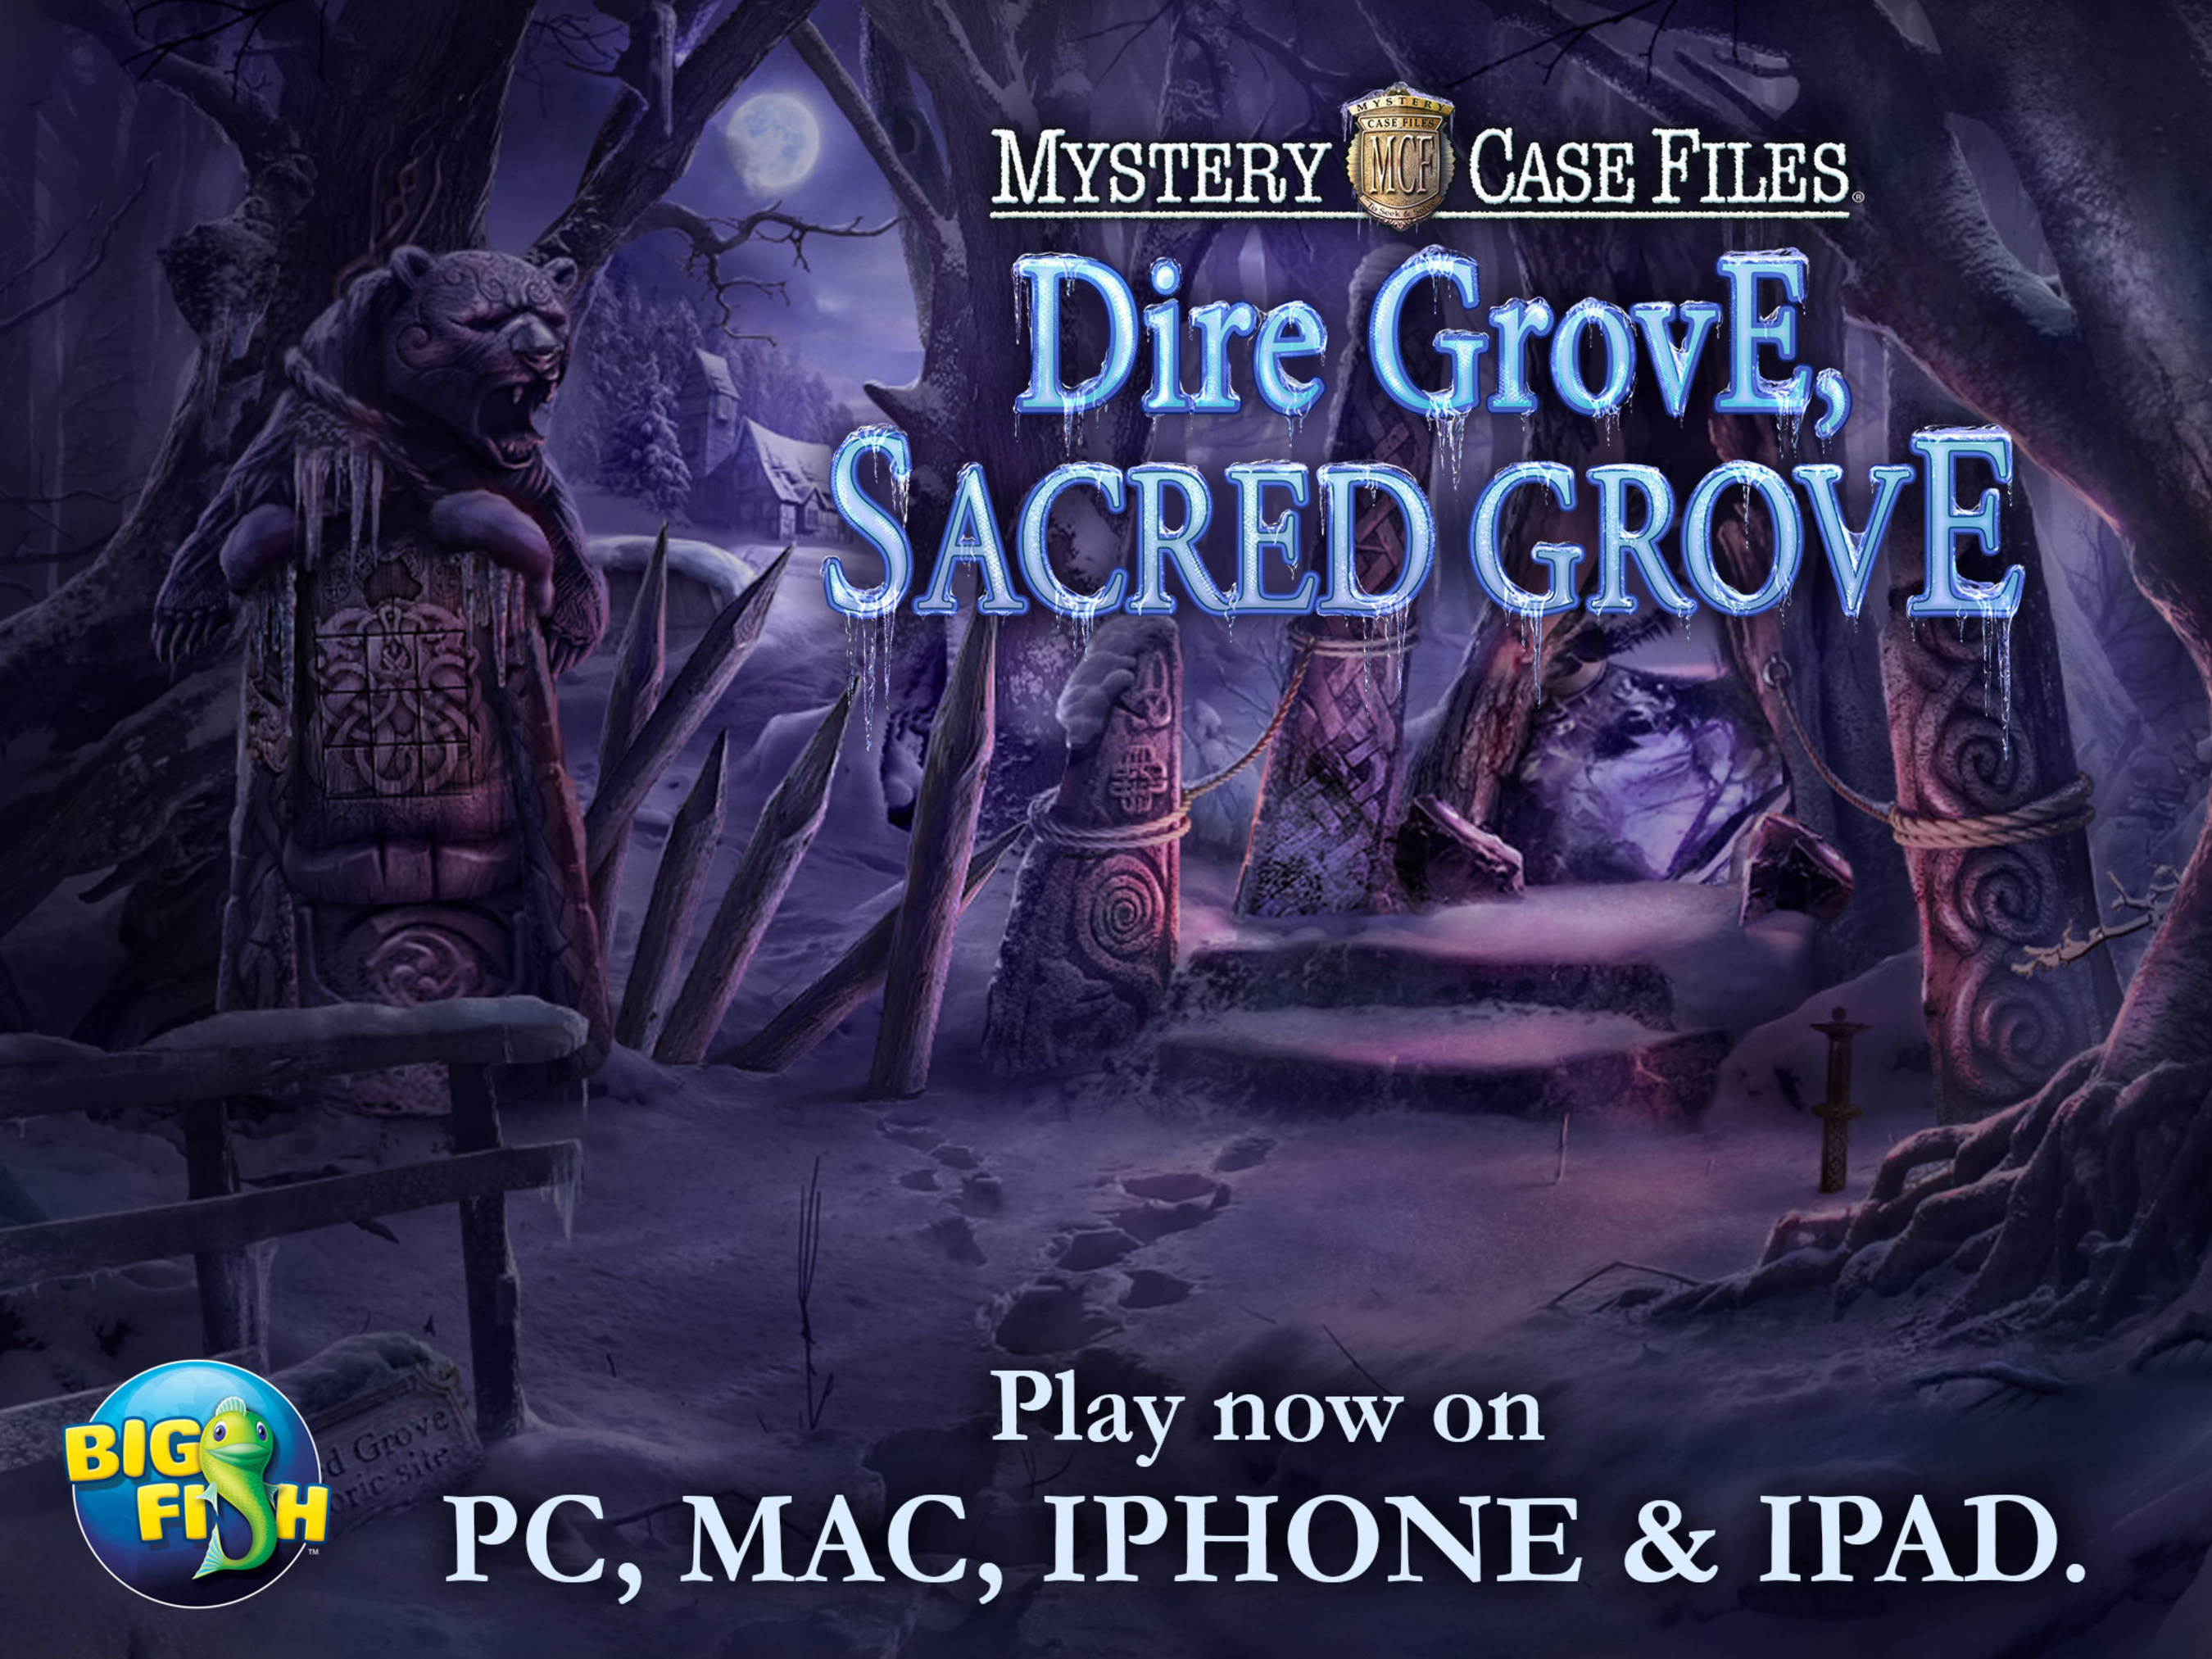 Mystery Case Files: Dire Grove, Sacred Grove, the 10th installment in the Mystery Case Files® series, is available today for PC and Mac, and releasing on Thursday, November 27th on smartphones and tablets. The Mystery Case Files series is Big Fish's most popular hidden object adventure game franchise, with over 53 million downloads across all platforms. This adventure series tasks players with finding hidden objects that they can use later in the game to continue the story and solve the game's numerous...